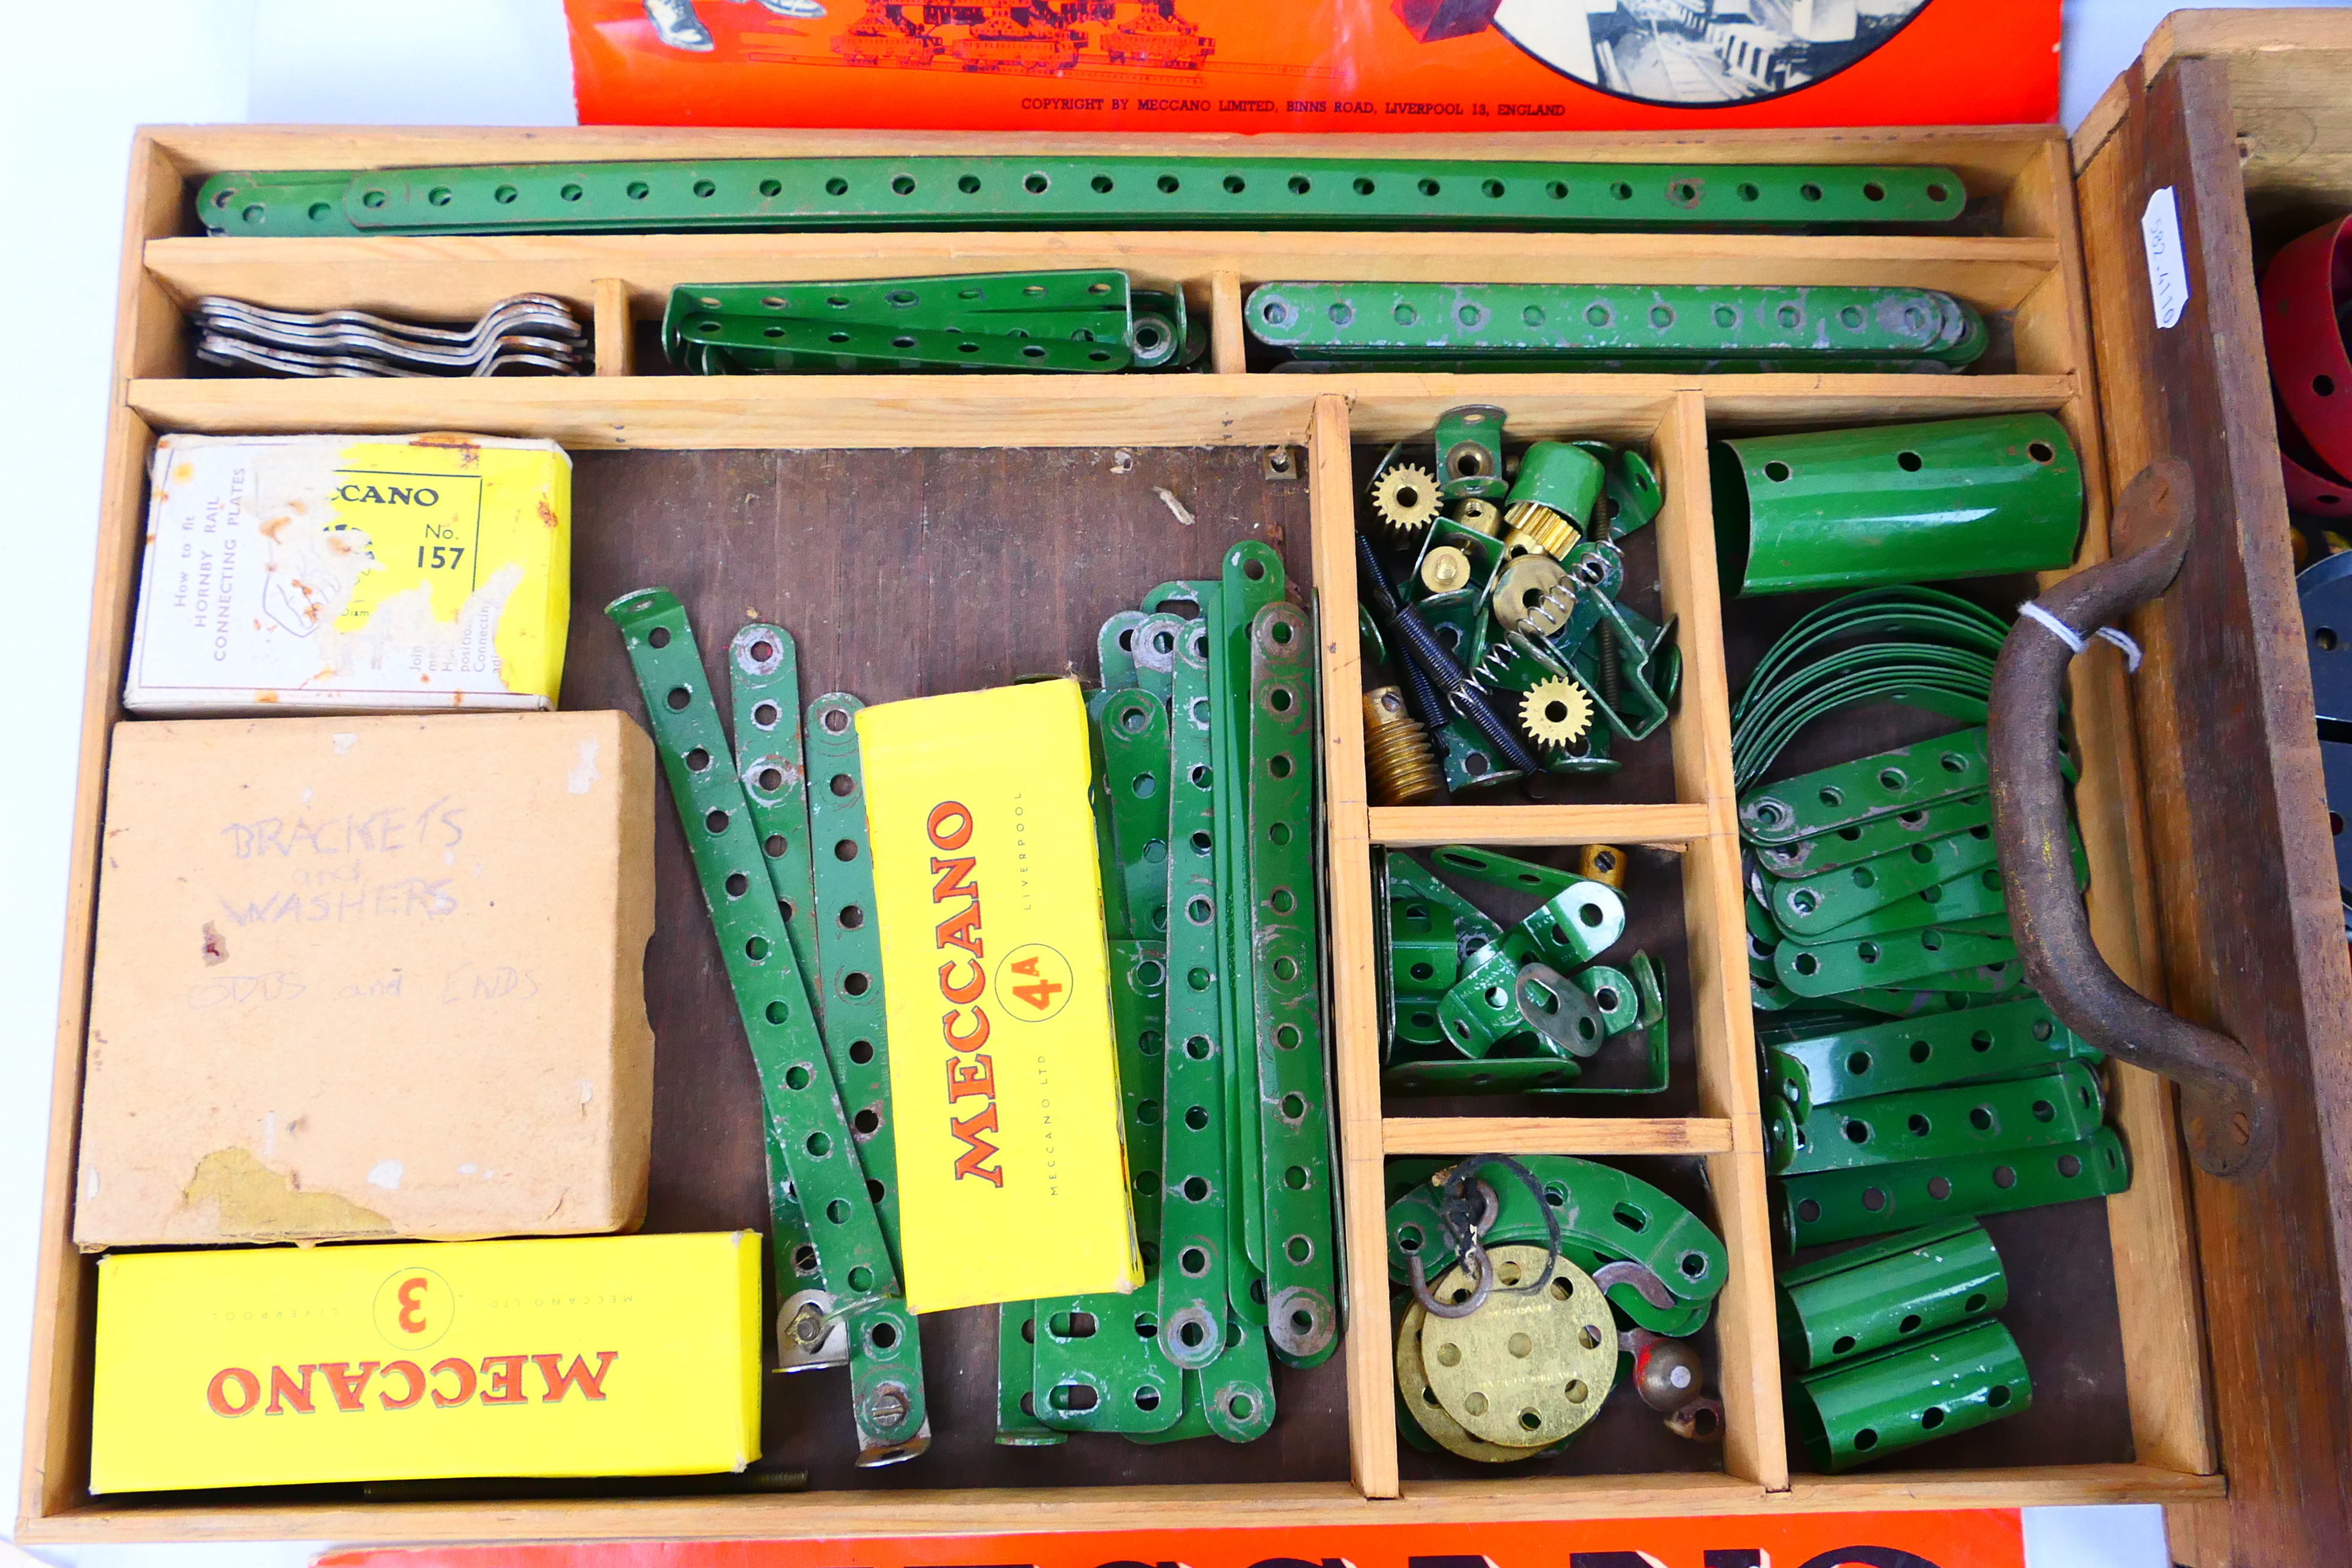 Meccano - A vintage wooden boxed Meccano set containing a quantity of red and green parts, wheels, - Bild 2 aus 8